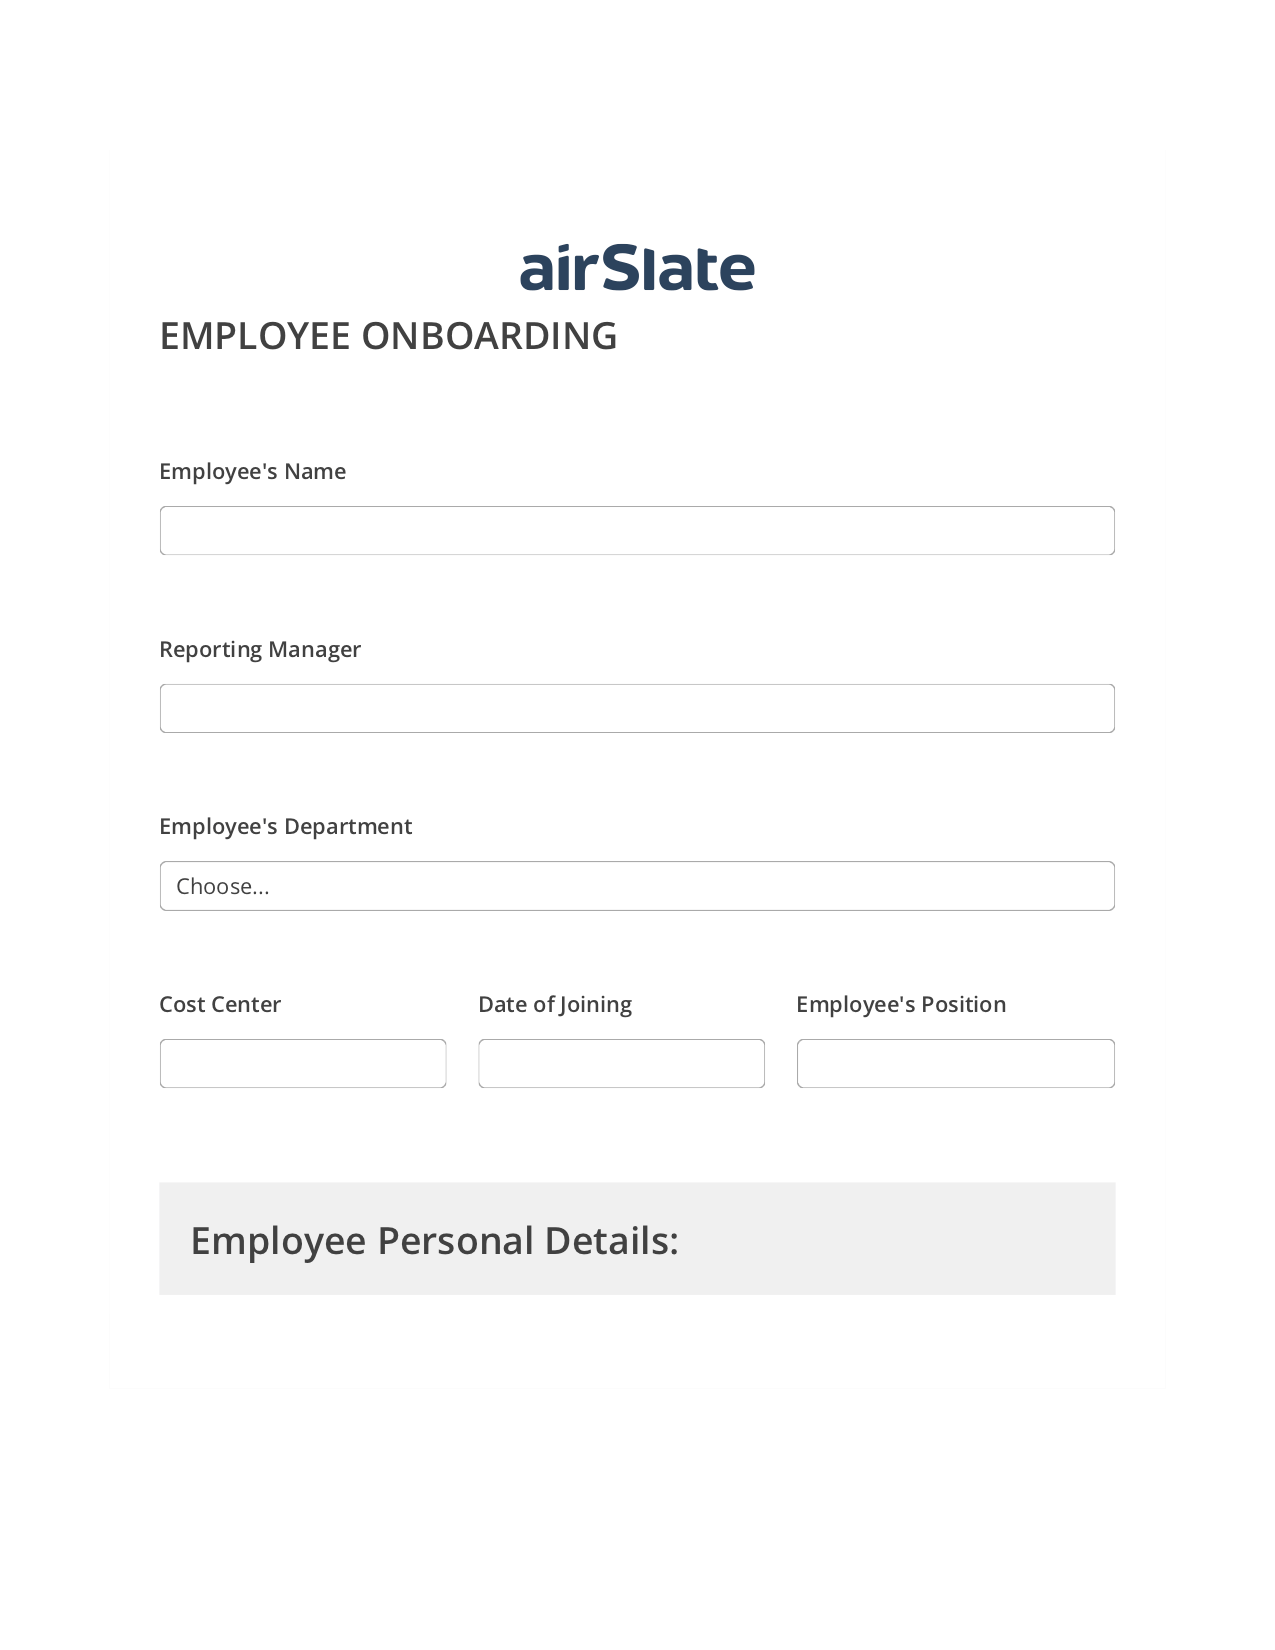 Employee Onboarding Workflow Pre-fill from MySQL Dropdown Options Bot, Update NetSuite Record Bot, Export to Google Sheet Bot